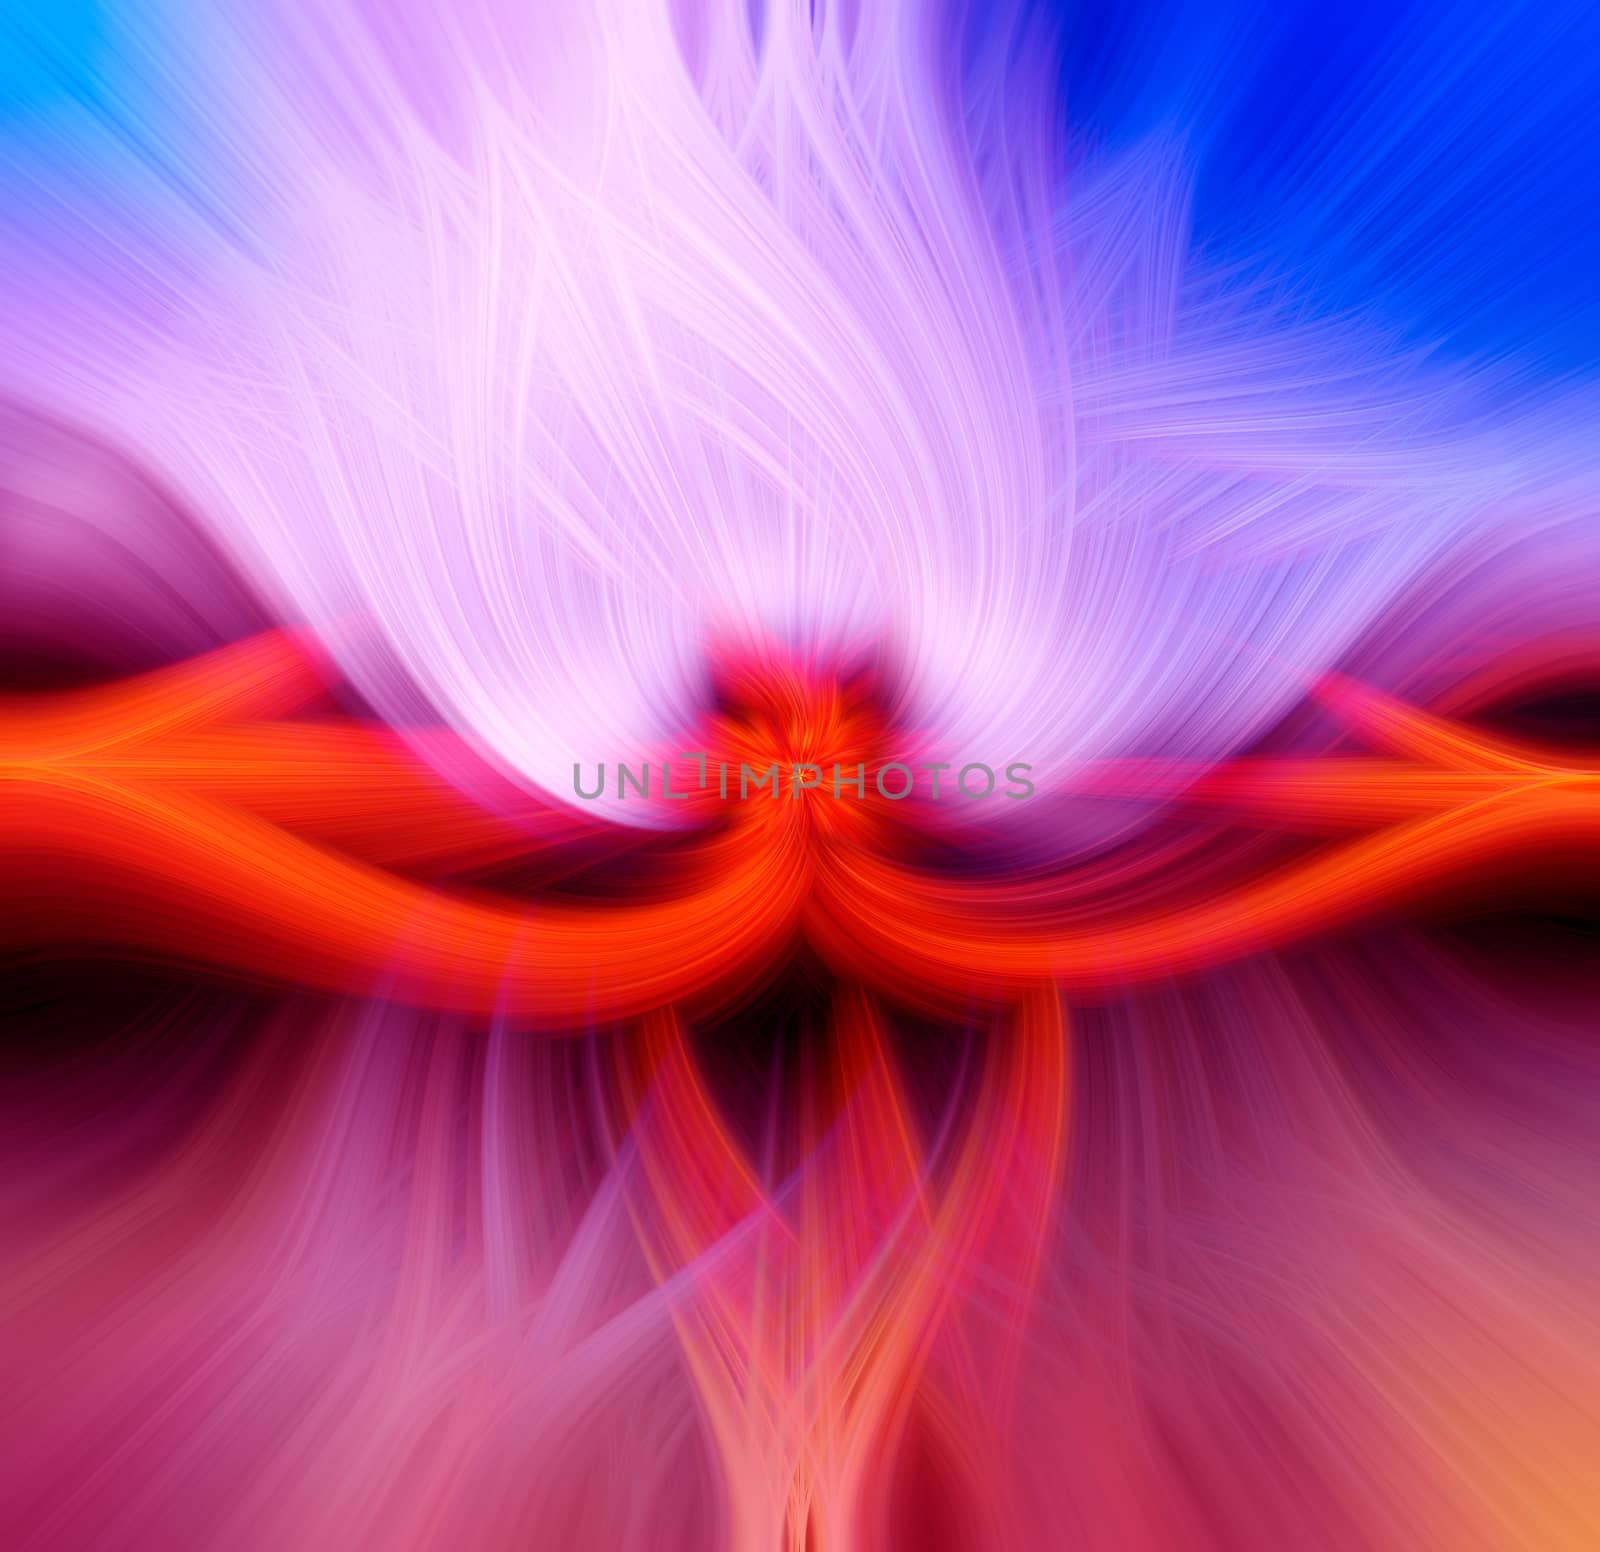 Beautiful abstract intertwined 3d fibers forming an ornament out of various symmetrical shapes. Shape of a white flame in the middle. Purple, pink, red, and blue colors. Illustration.